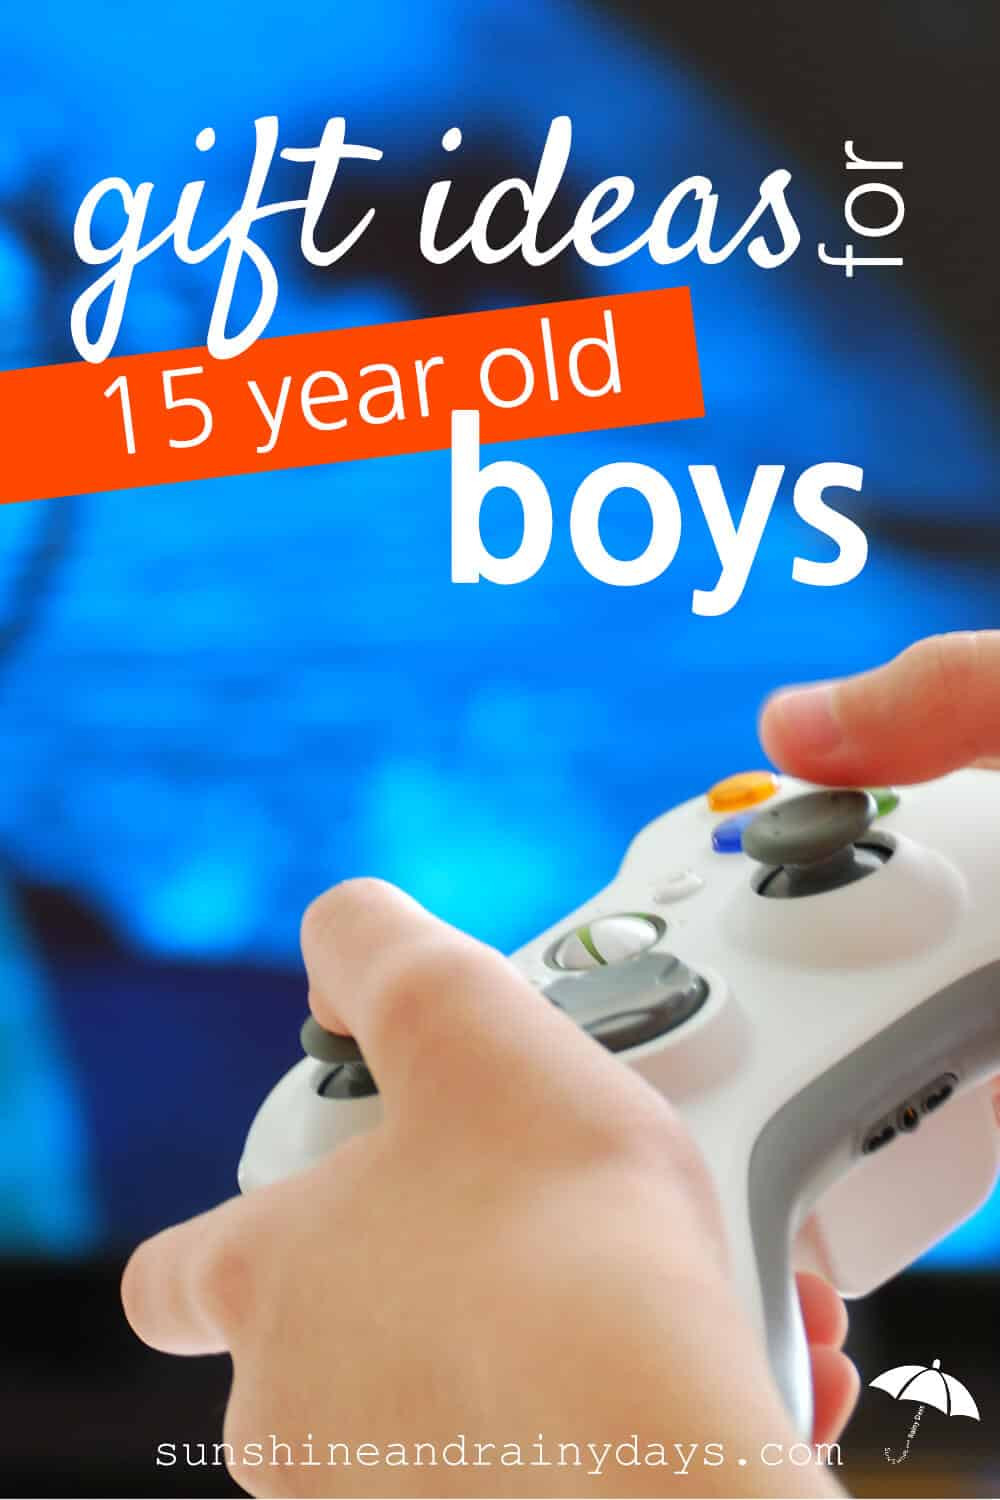 Gift Ideas For 15 Year Old Boys
 Gift Ideas For 15 Year Old Boys Sunshine And Rainy Days